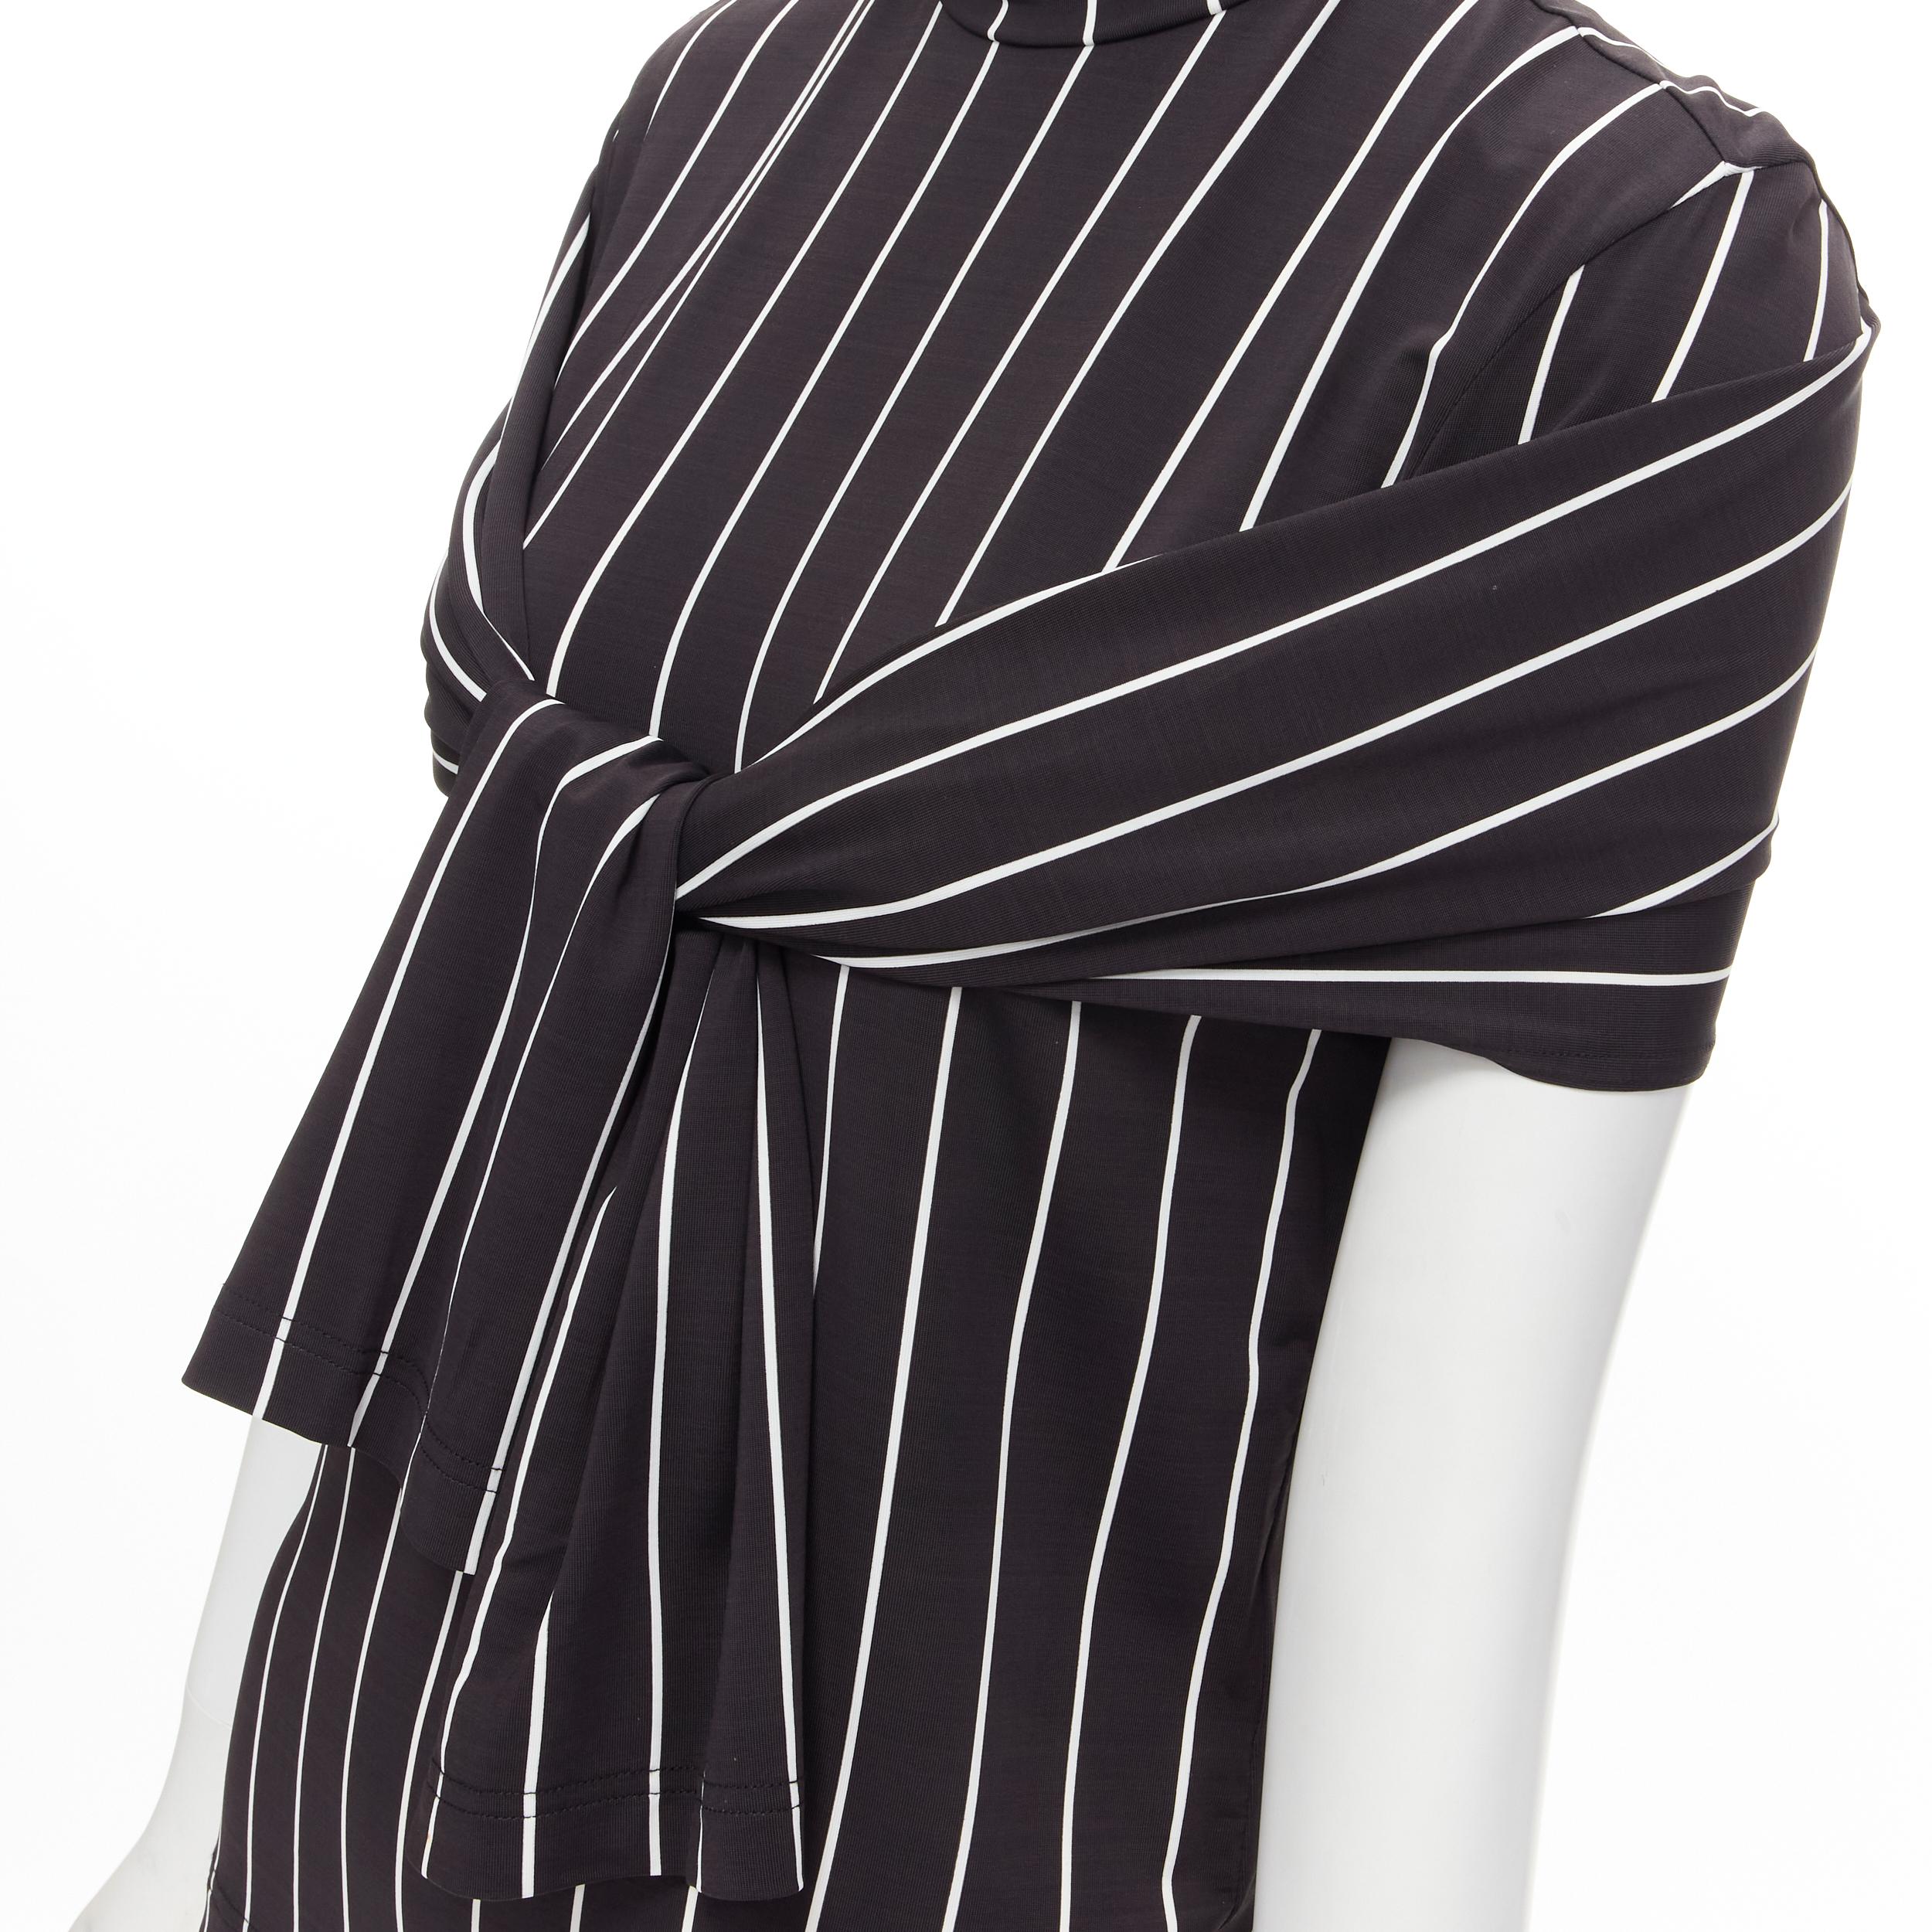 BALENCIAGA 2016 black white vertical stripe underarm slit cut out turtleneck top XS 
Reference: MELK/A00151 
Brand: Balenciaga 
Designer: Demna 
Collection: 2016 
Material: Viscose 
Color: Black 
Pattern: Striped 
Extra Detail: Cut out slit at